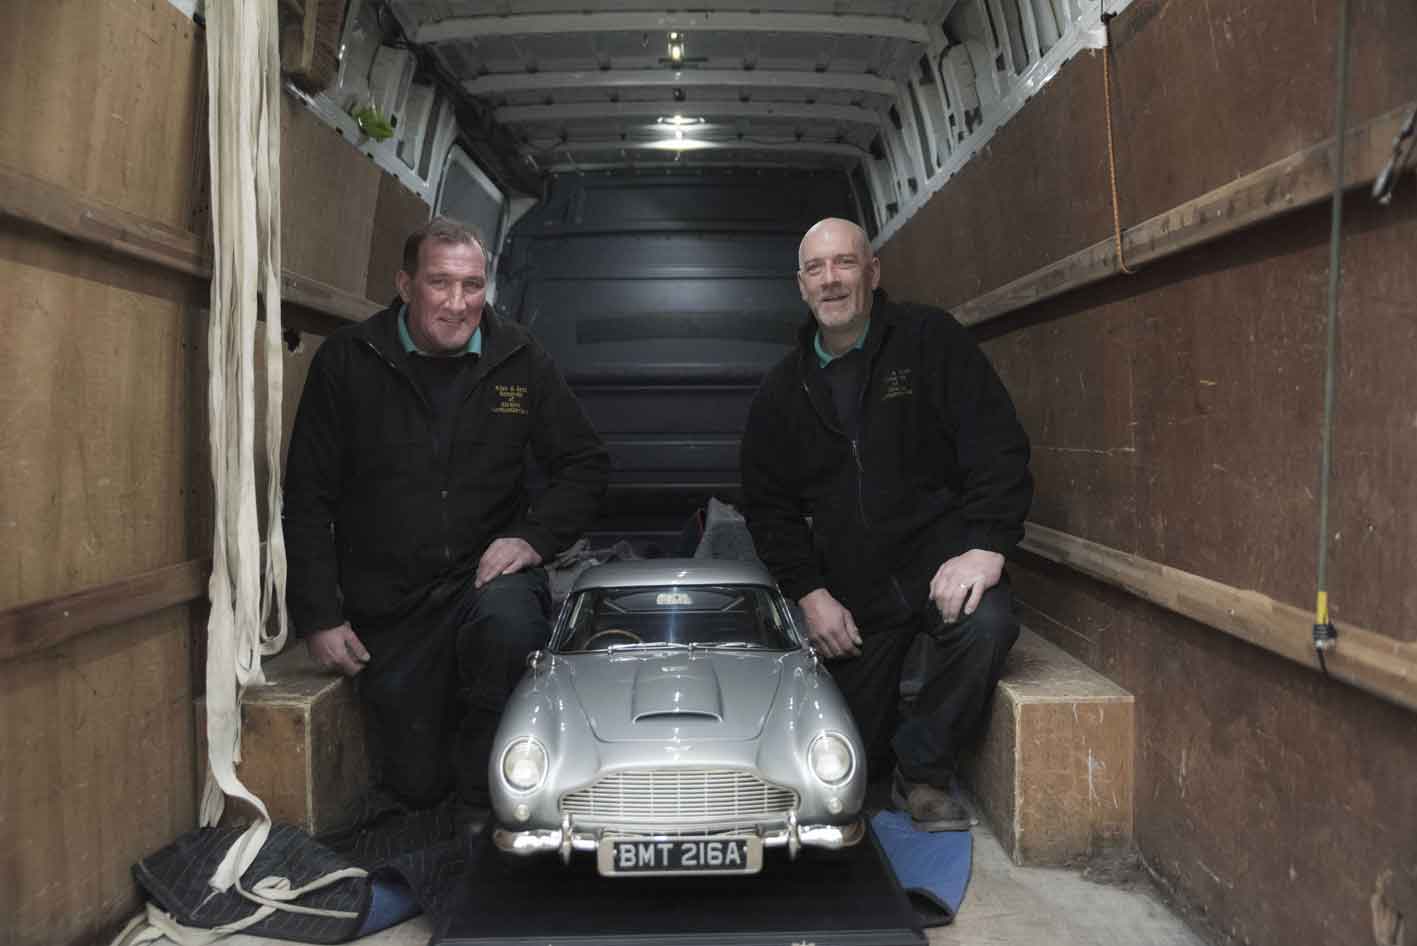 Brian and Sons Transporting Antique Goods